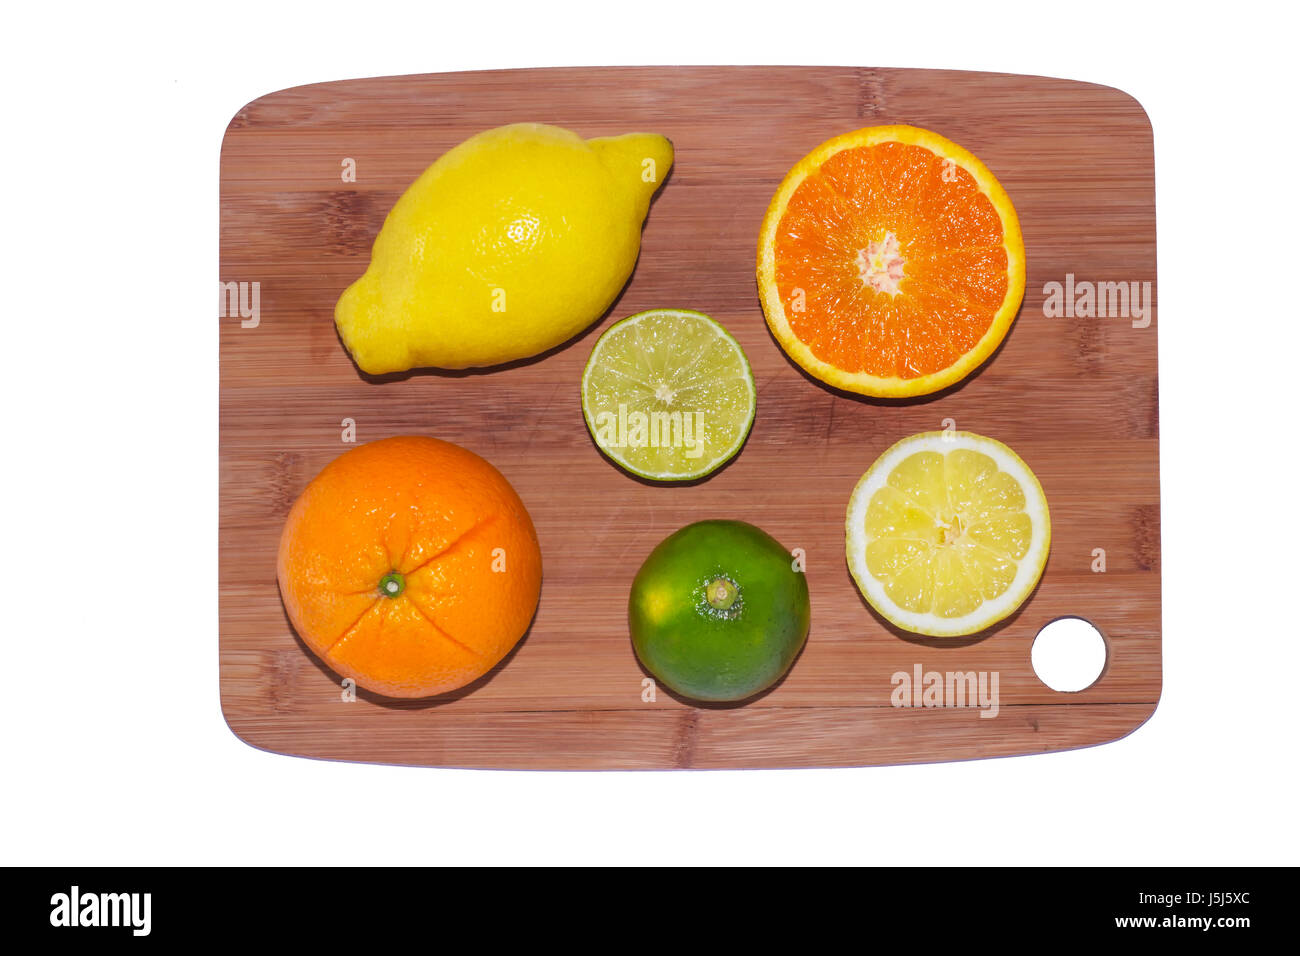 A selection of chopped oranges, lemons and limes on a wooden board on white background. Stock Photo